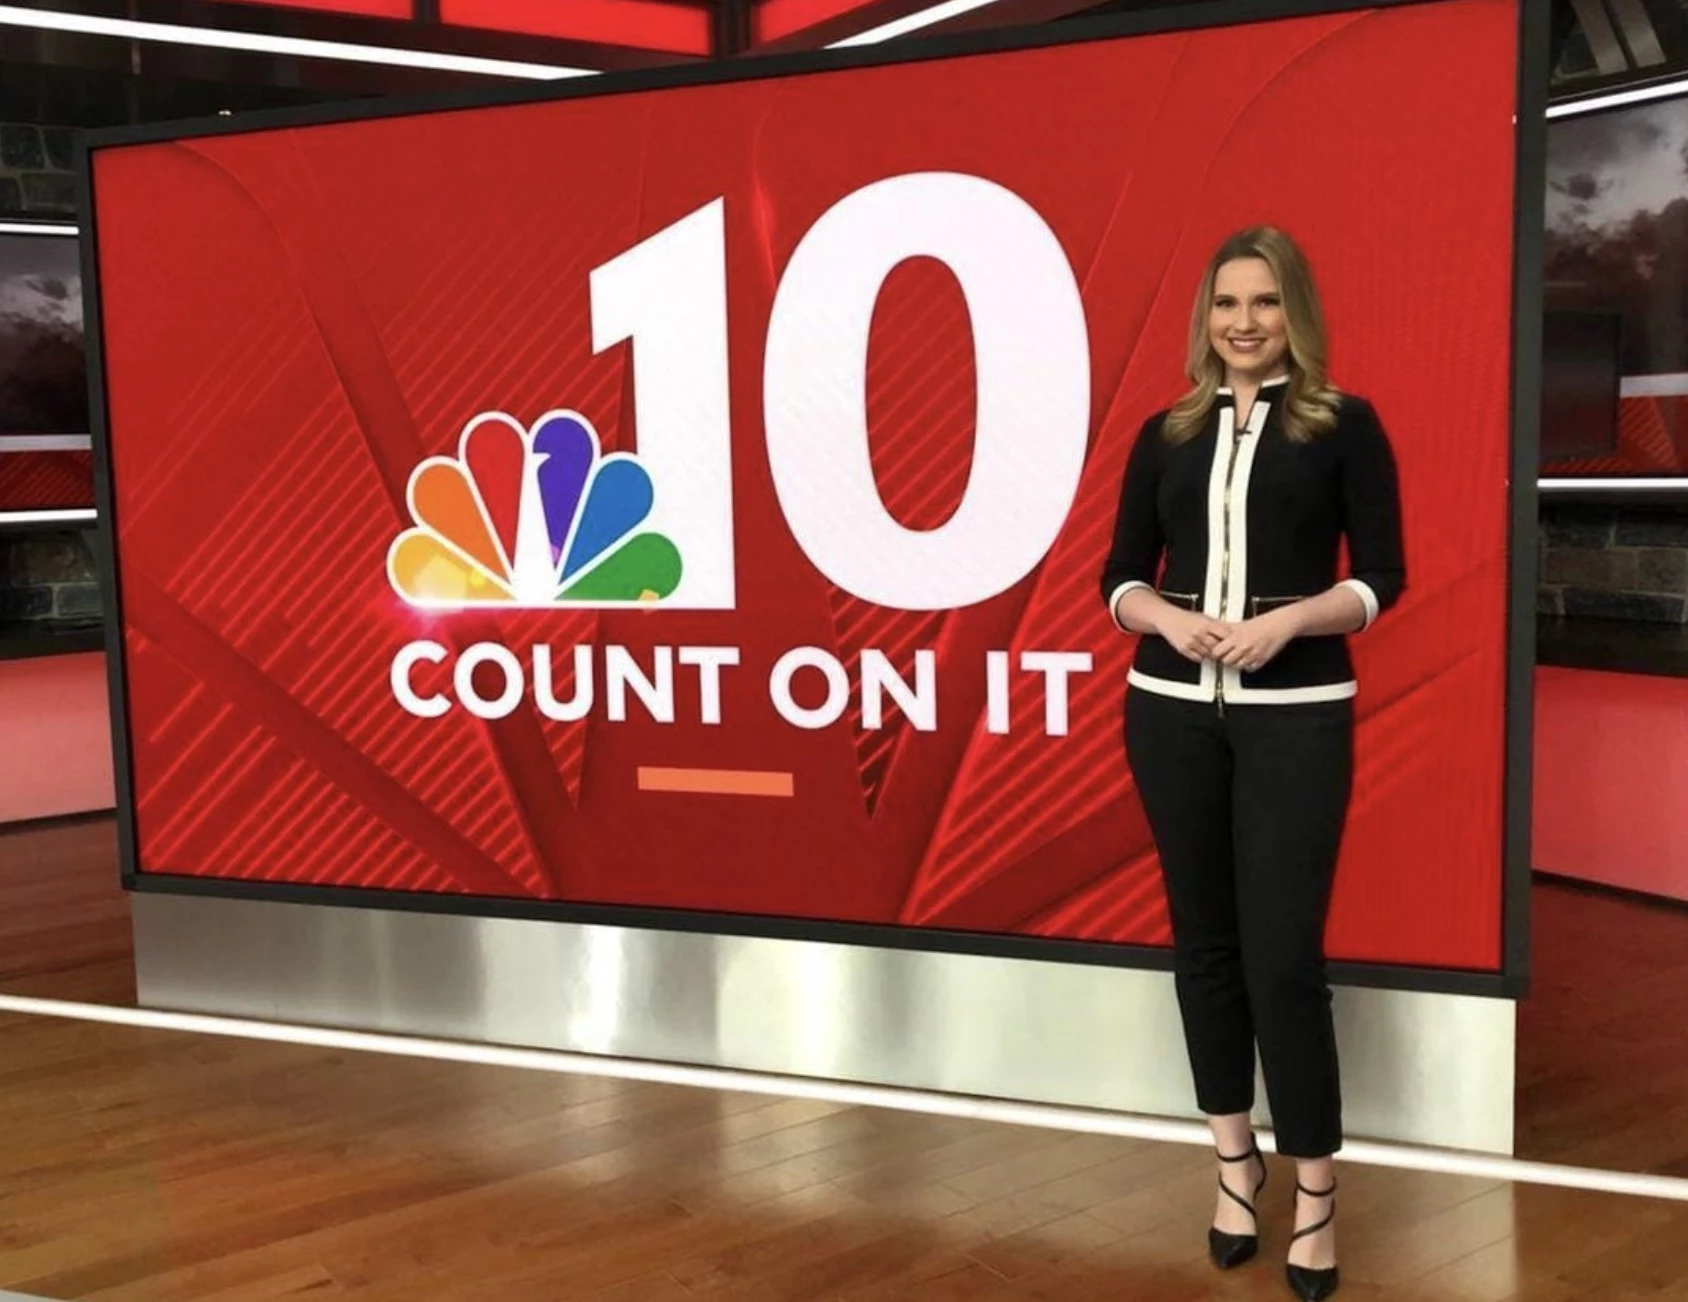 We Catch up With NBC10's Jacqueline London